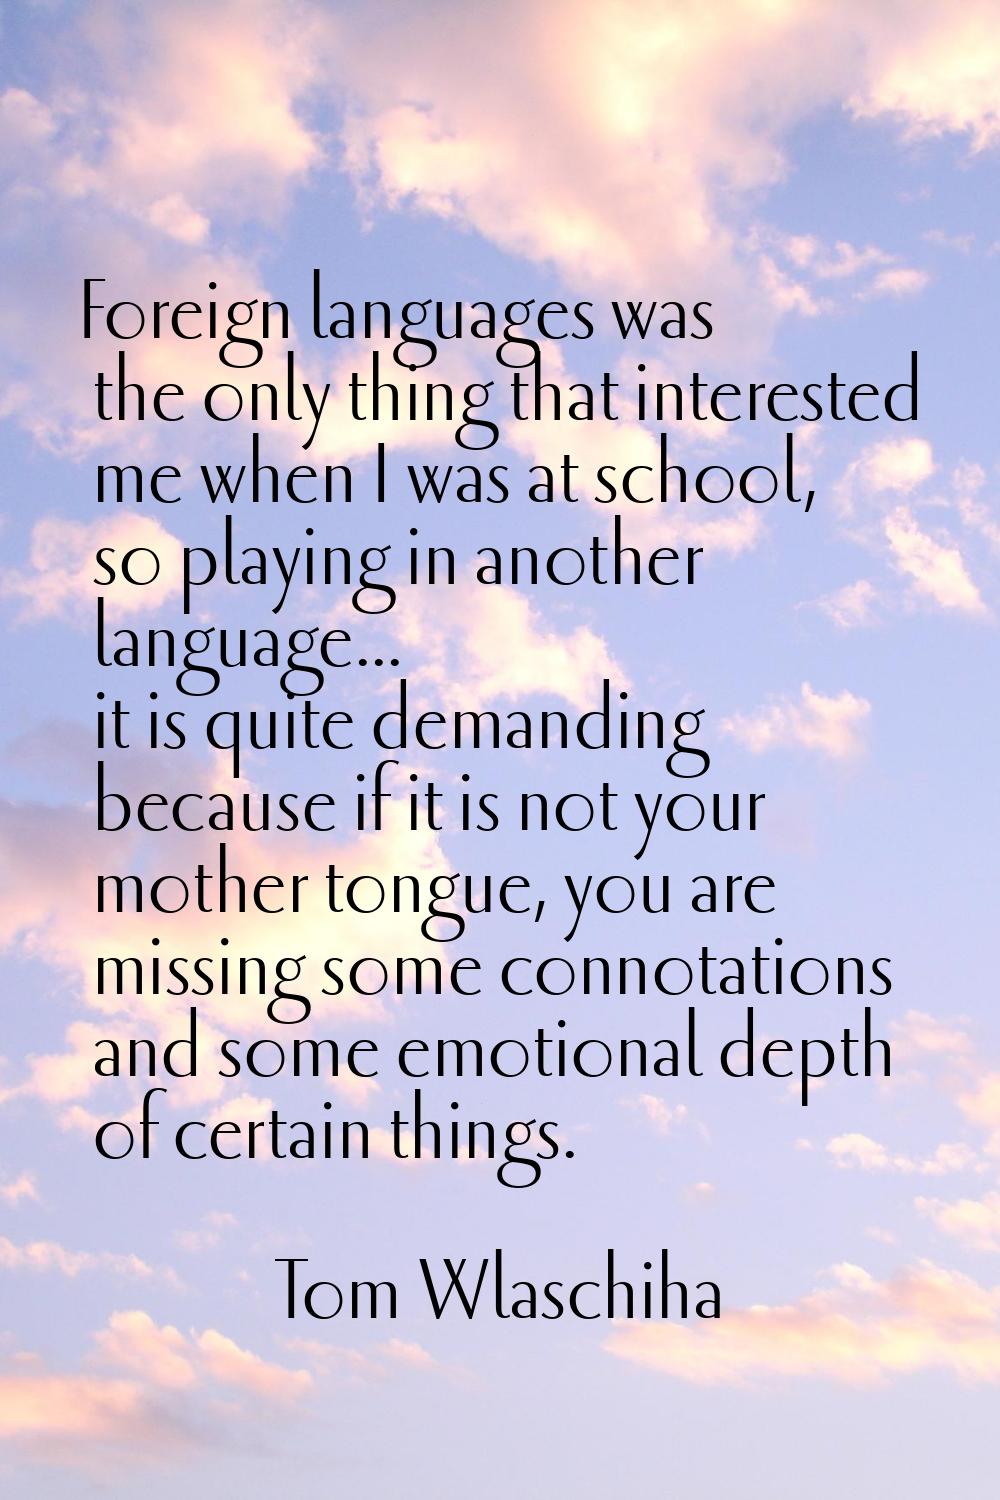 Foreign languages was the only thing that interested me when I was at school, so playing in another